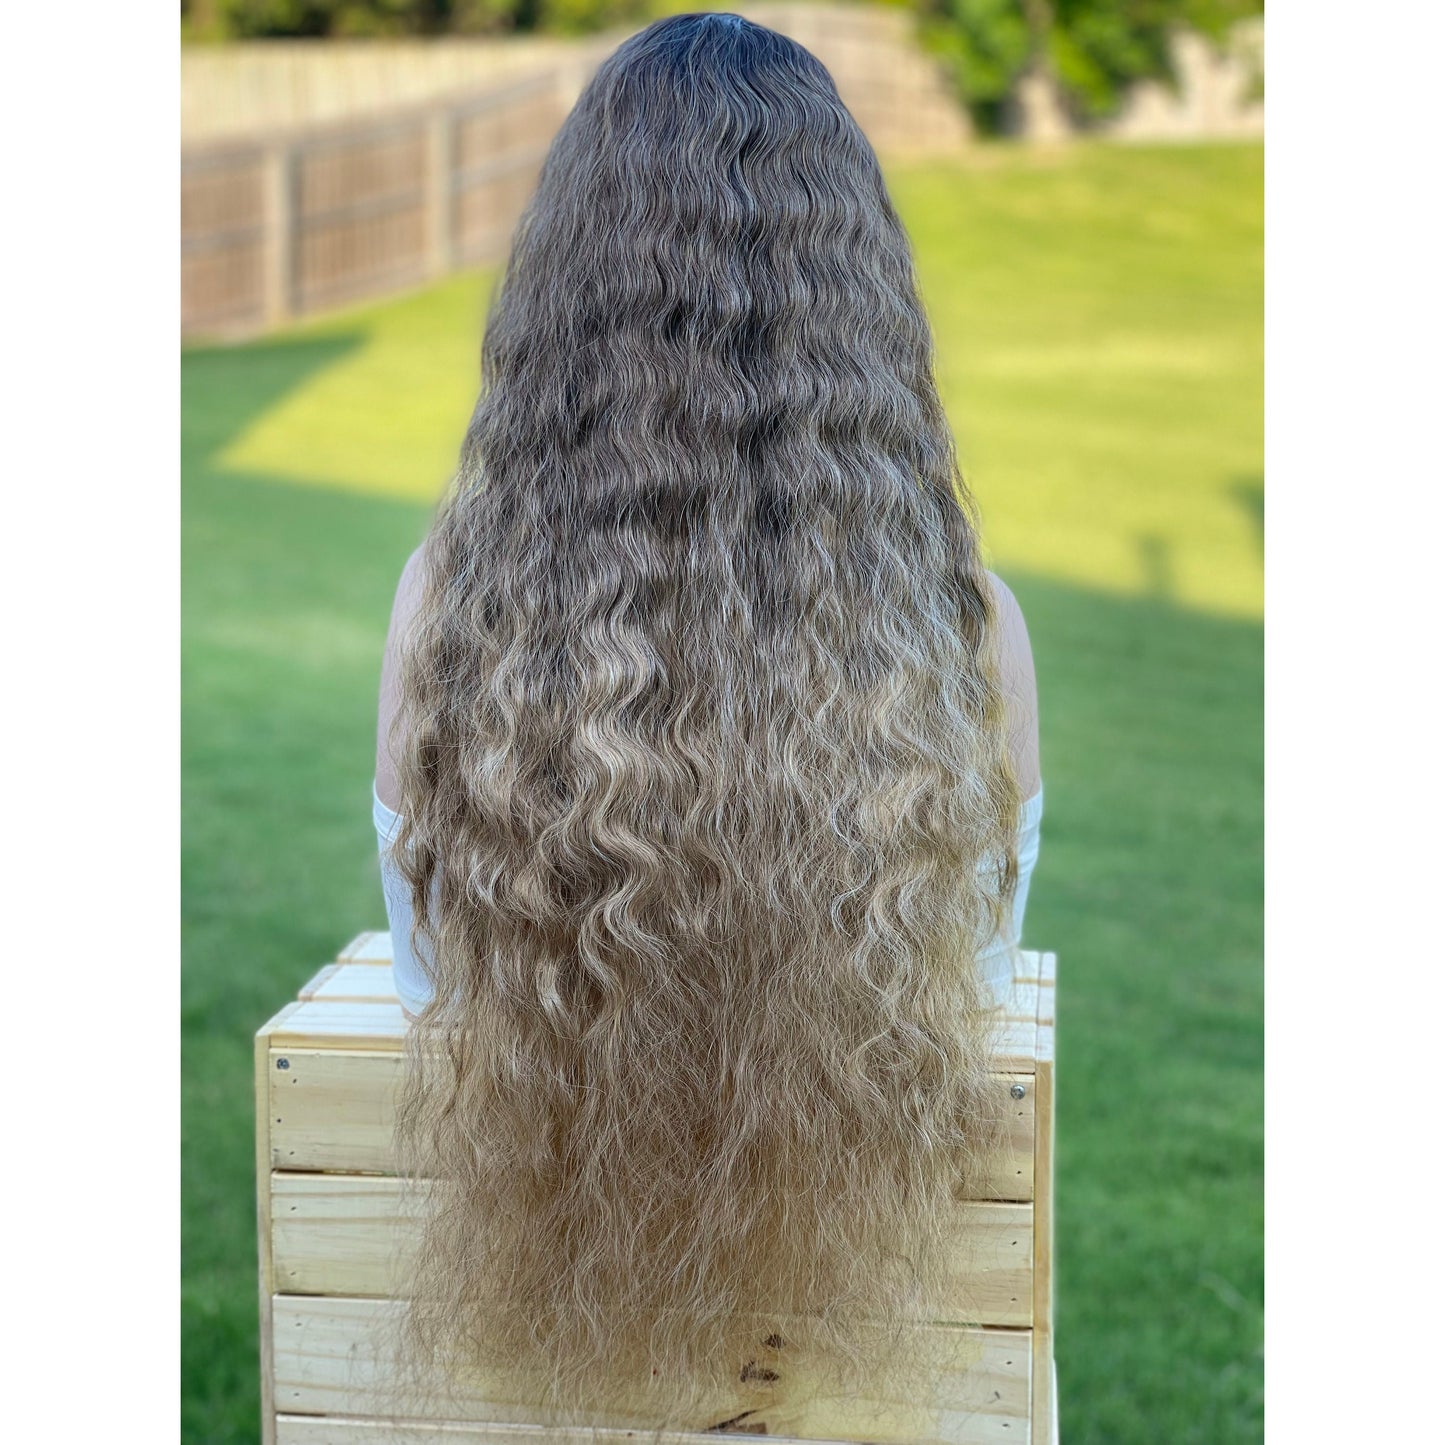 Brown to Blonde 13x5 wide part lace front wig / 28" Deep Wavy Blonde Luxury Human Hair Blend Wig